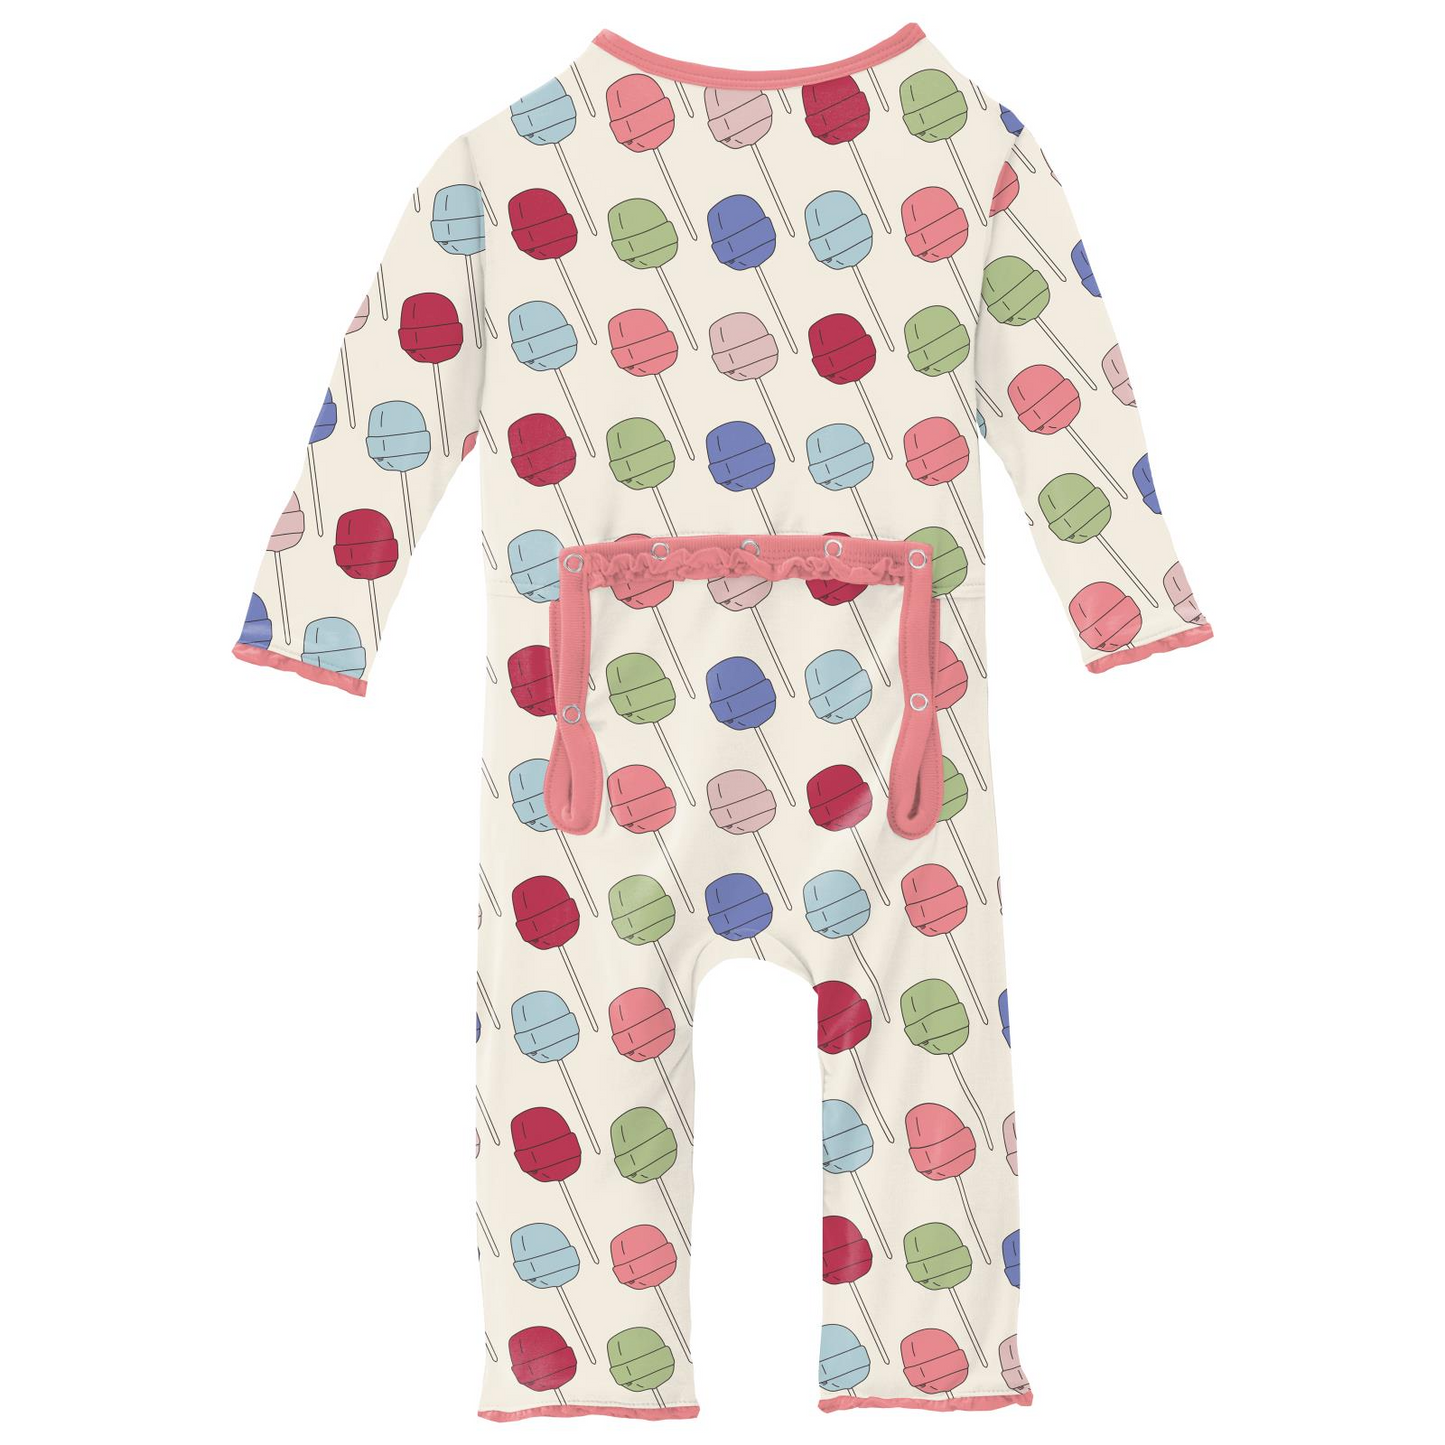 Bamboo Print Muffin Ruffle Coverall with 2 Way Zipper: Lula's Lollipops